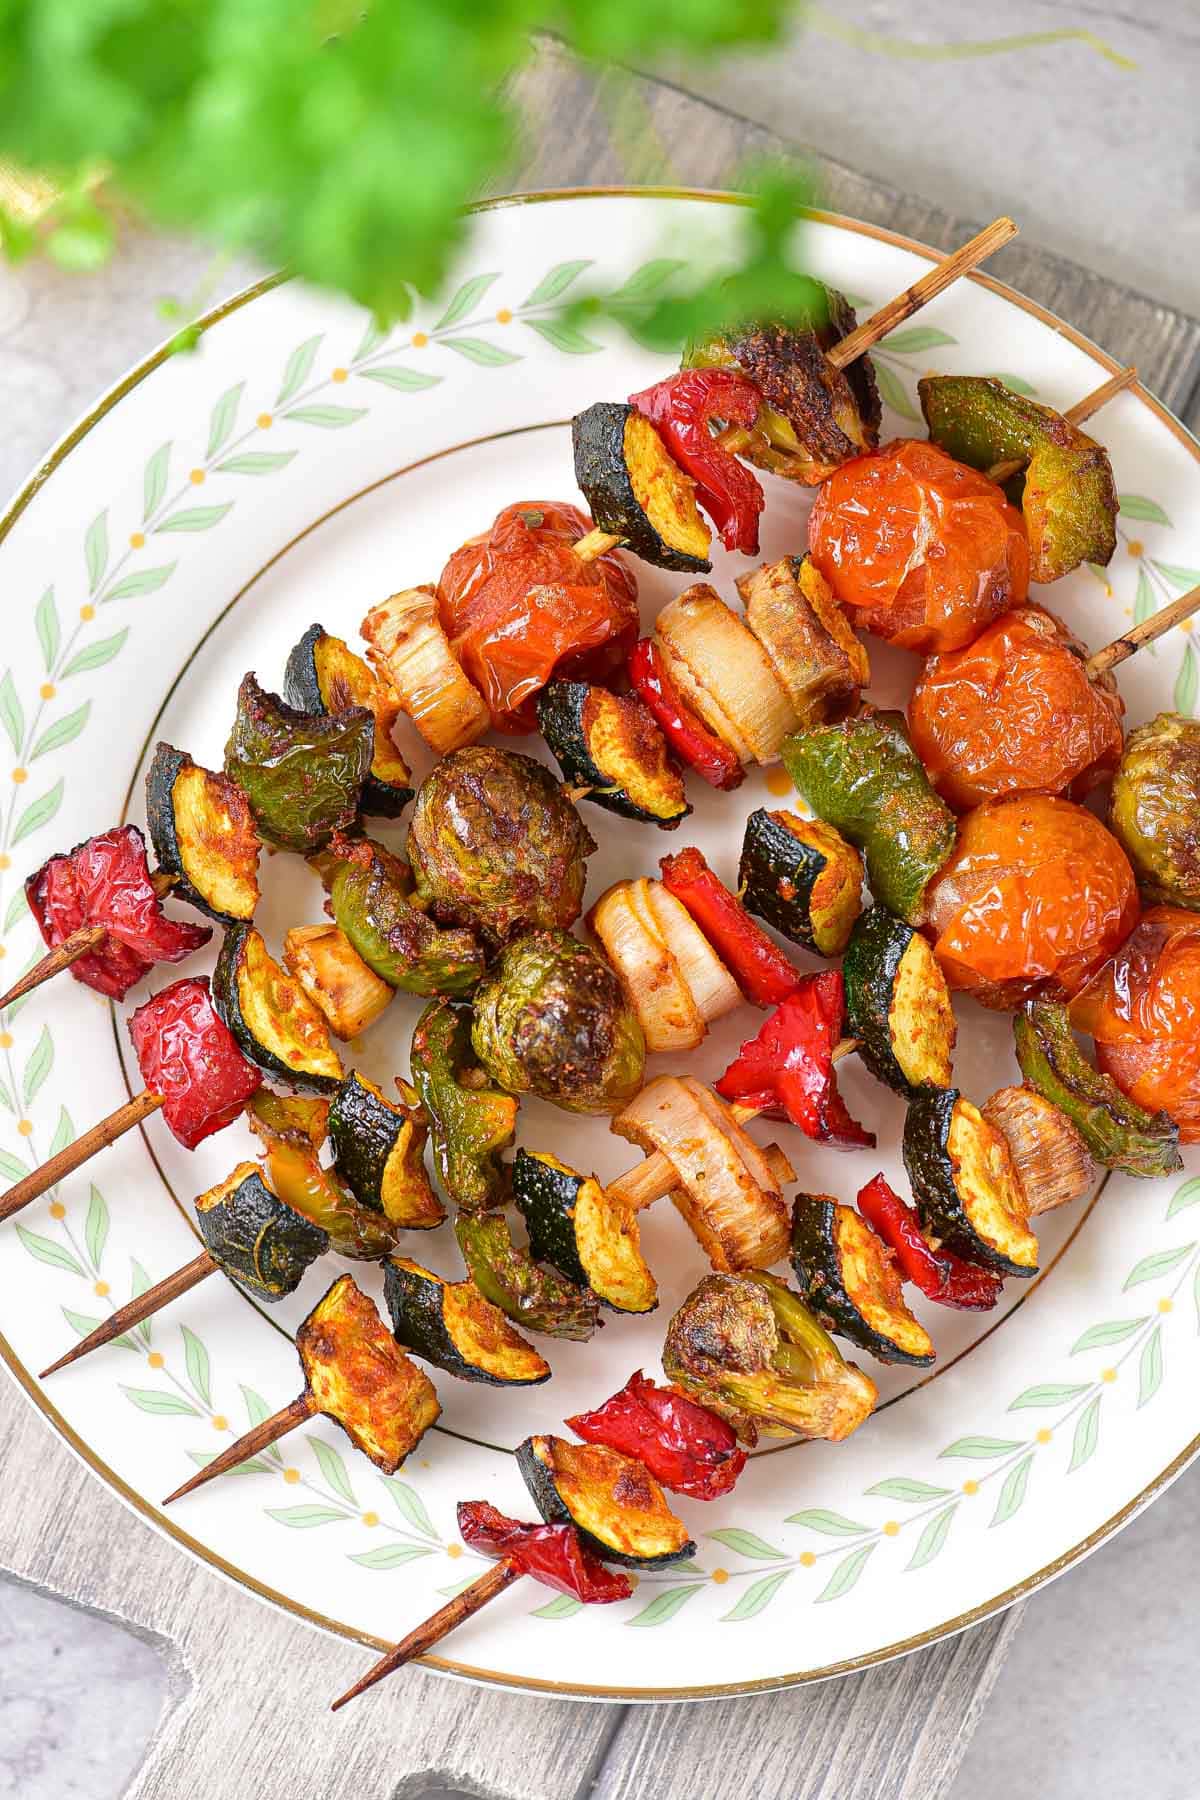 cooked vegetable kabobs on wooden skewers arranged in a row on a white plate.